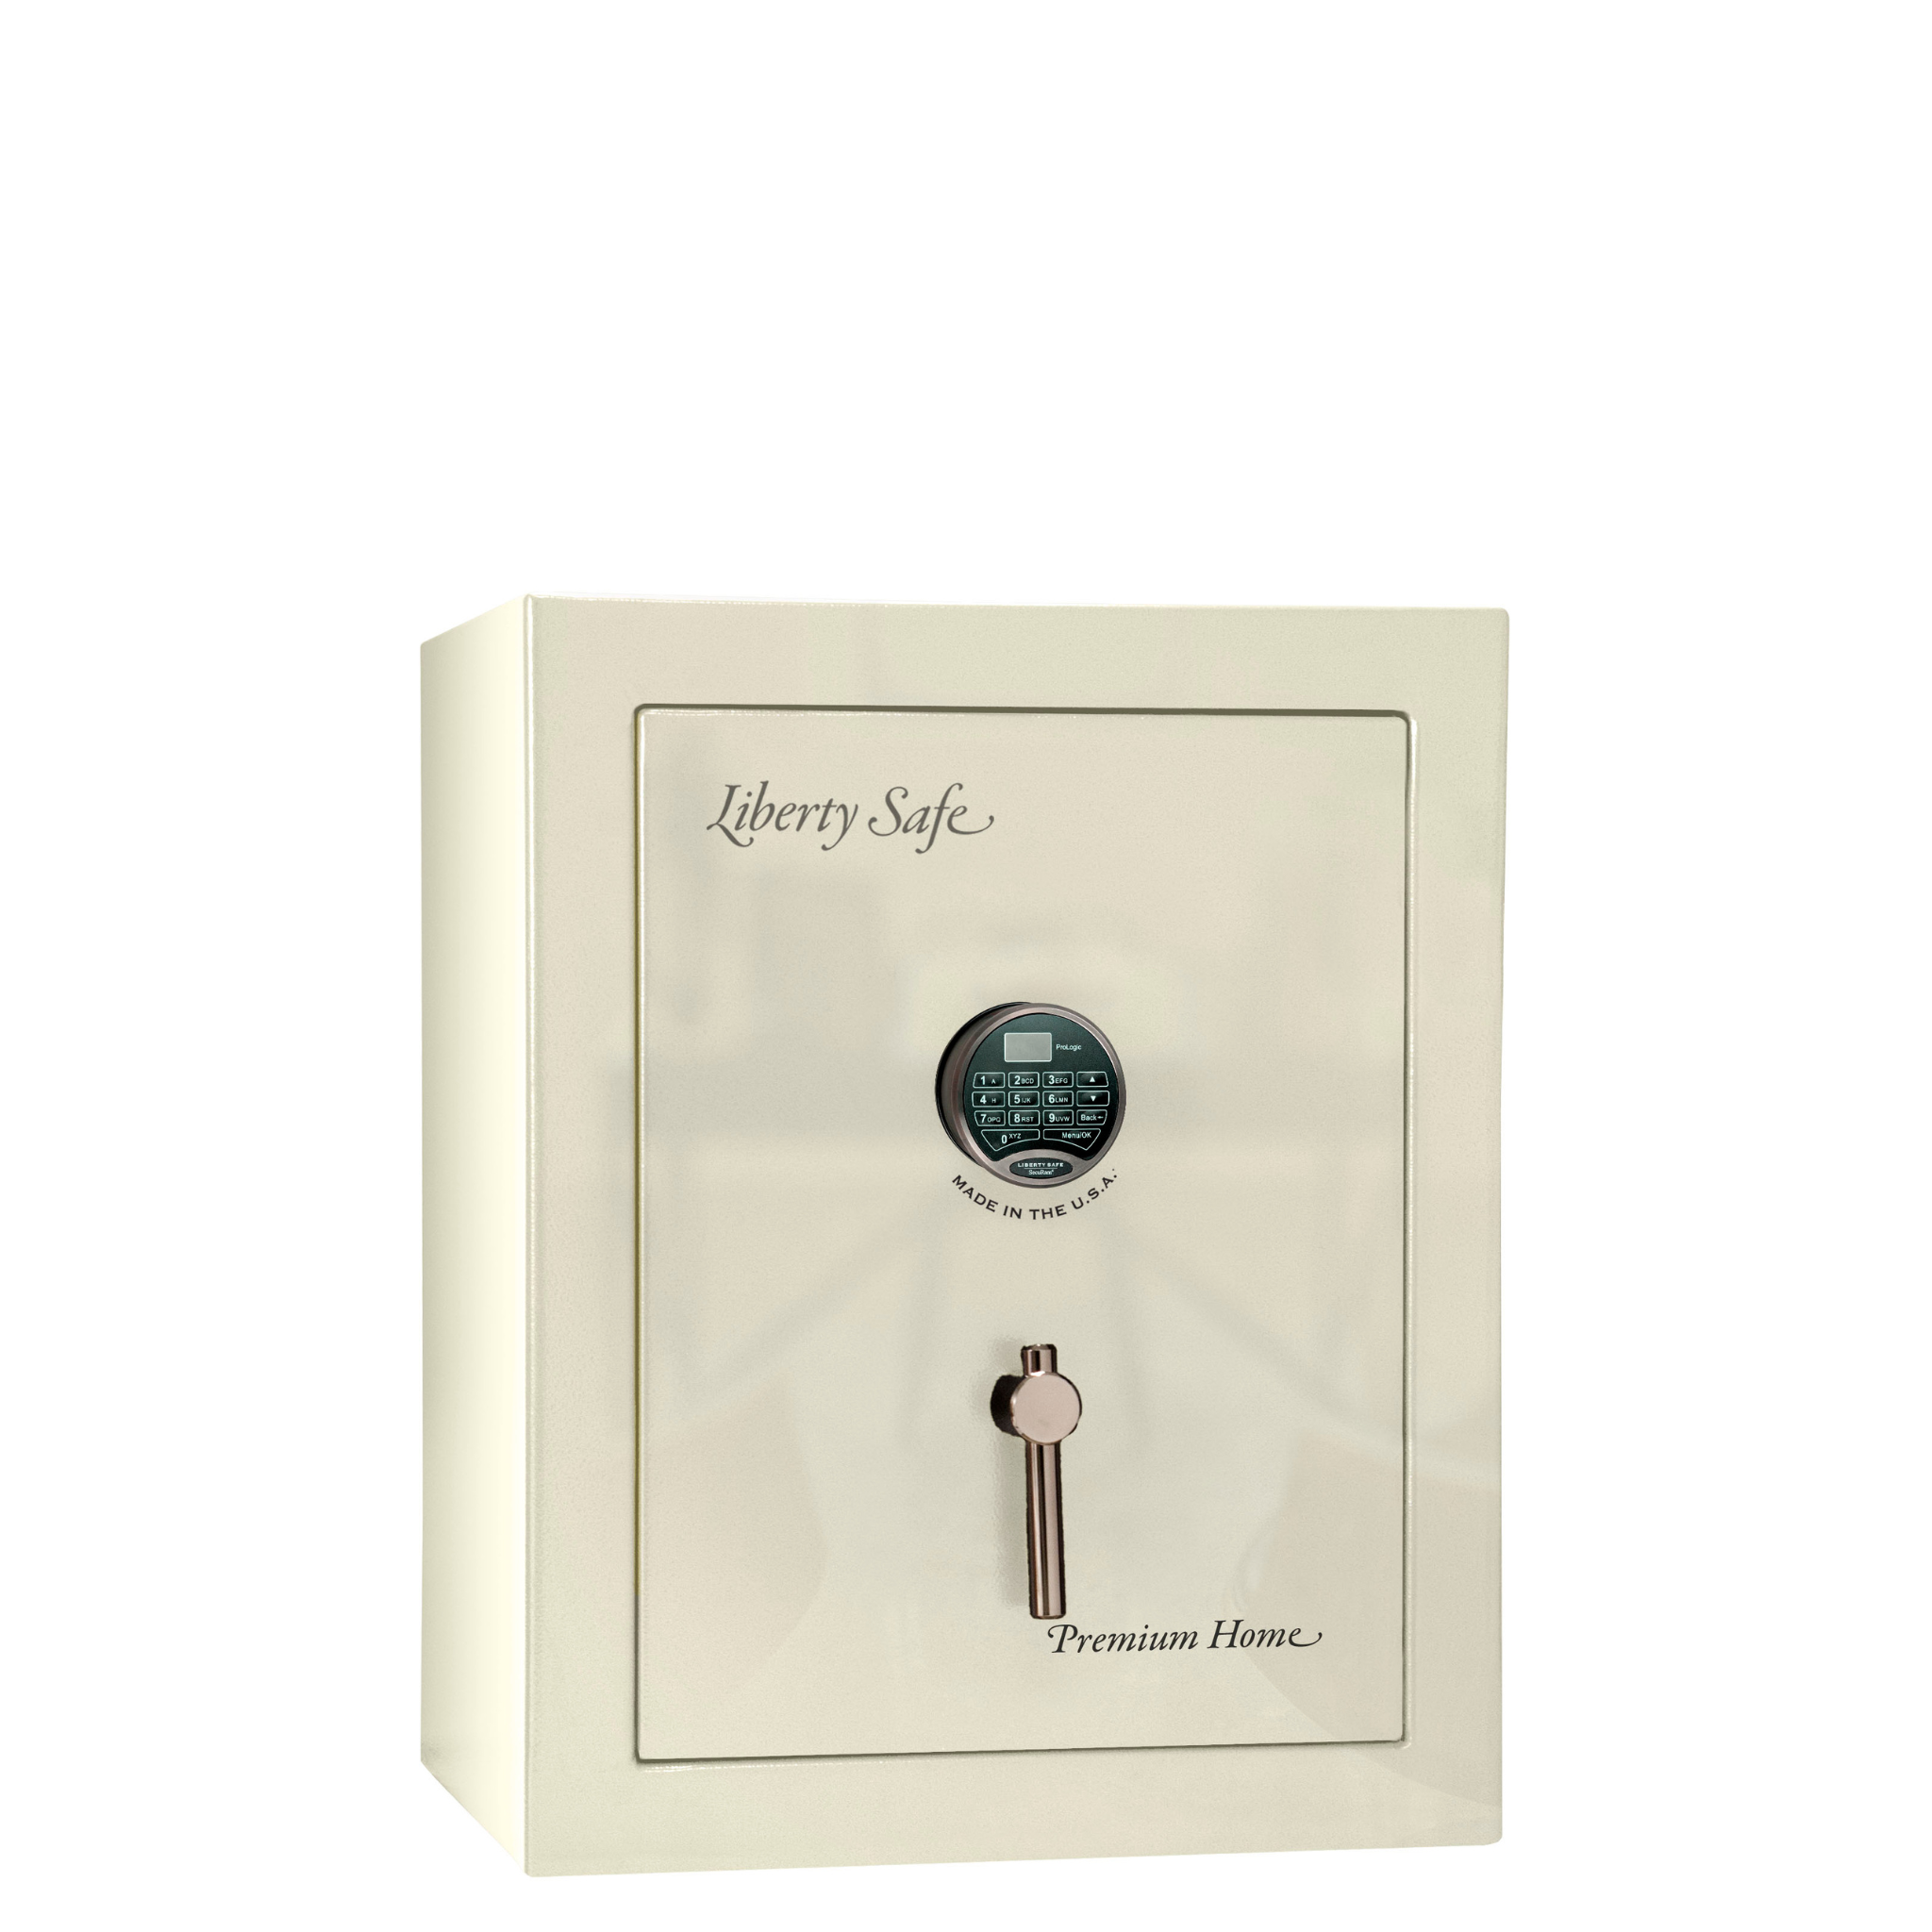 Premium Home Series | Level 7 Security | 2 Hour Fire Protection | 08 | Dimensions: 29.75"(H) x 24.5"(W) x 19"(D) | White Marble - Closed Door